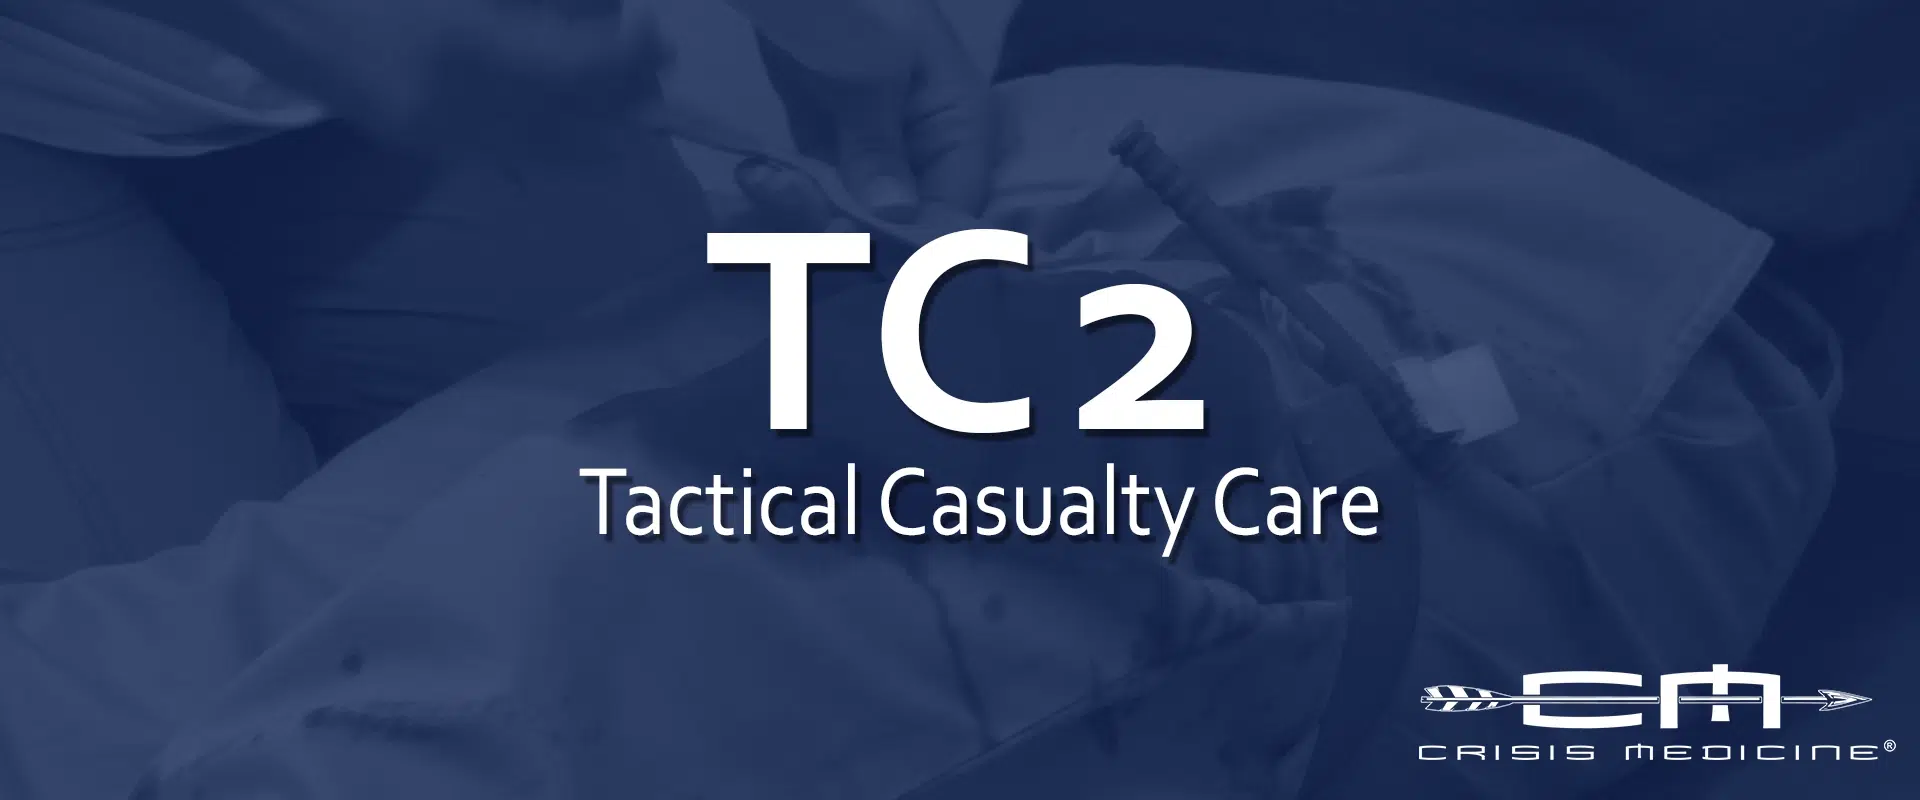 Tactical Casualty Care – ONLINE